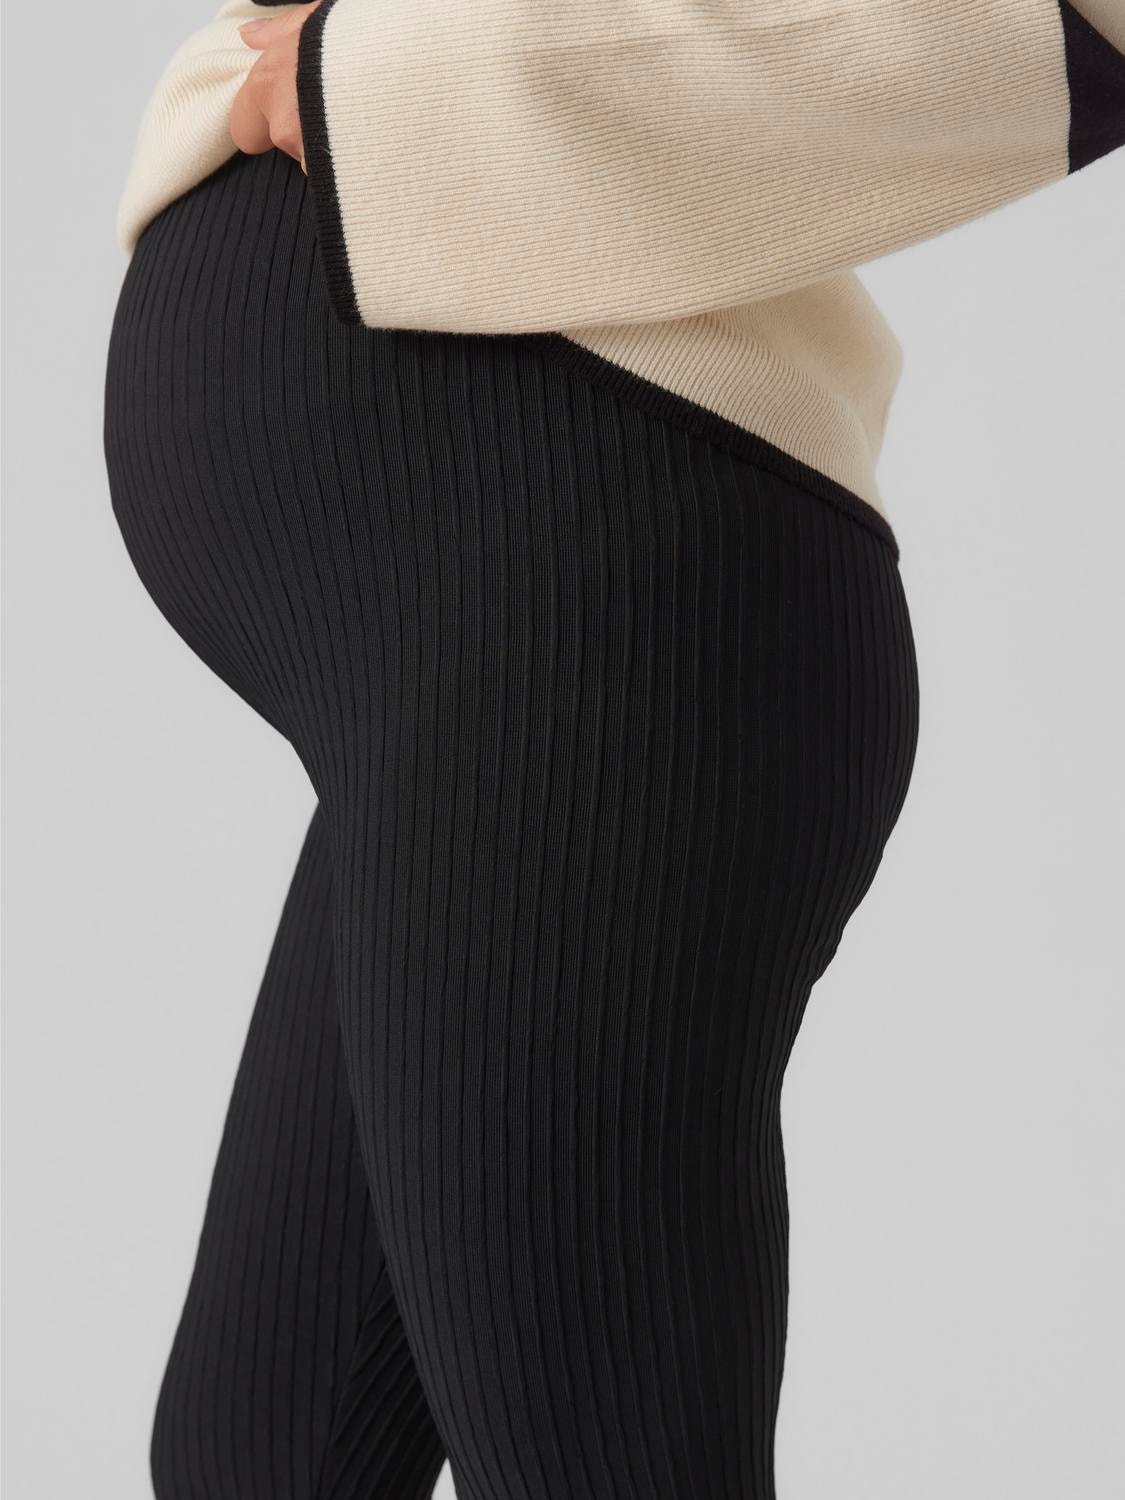 Spanx Mama Look at Me Now Seamless Maternity Leggings